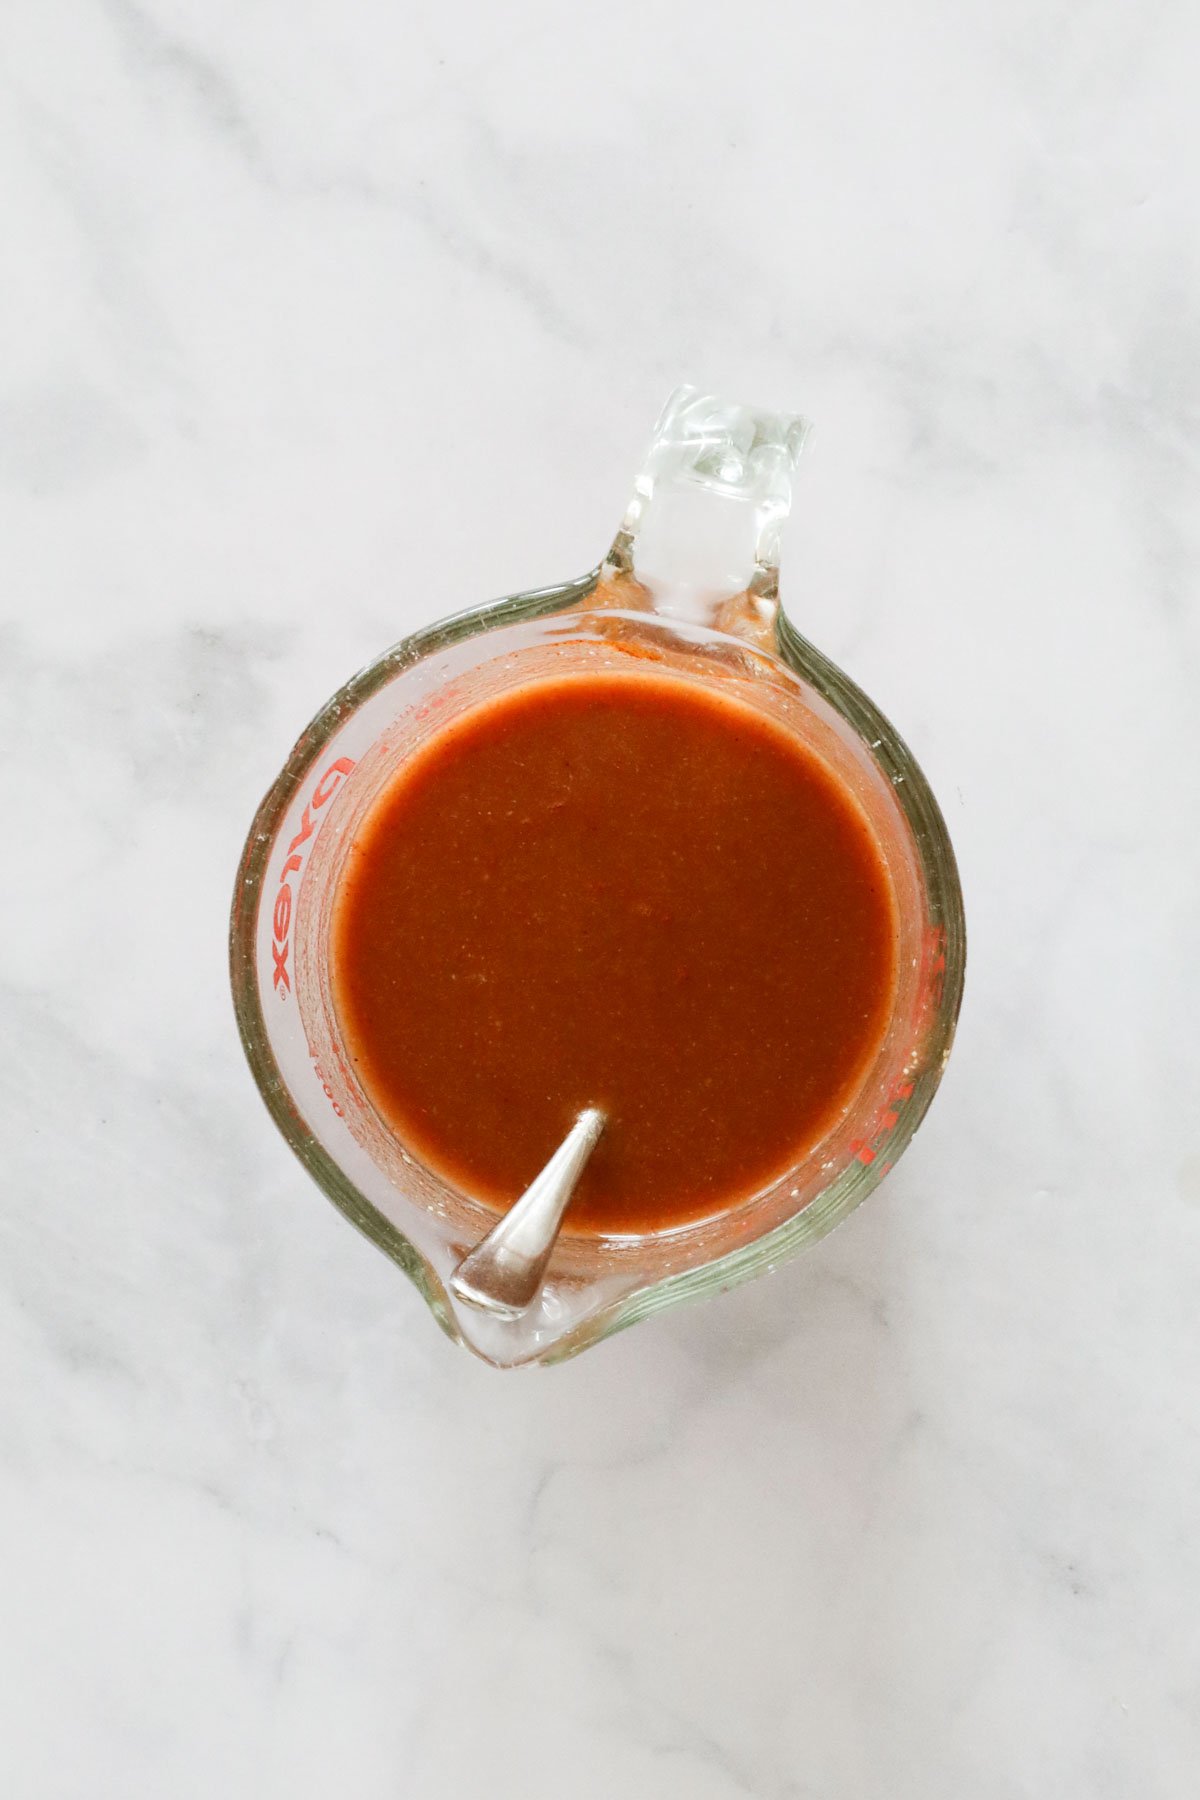 Stock, tomato paste and seasonings, mixed in a jug.